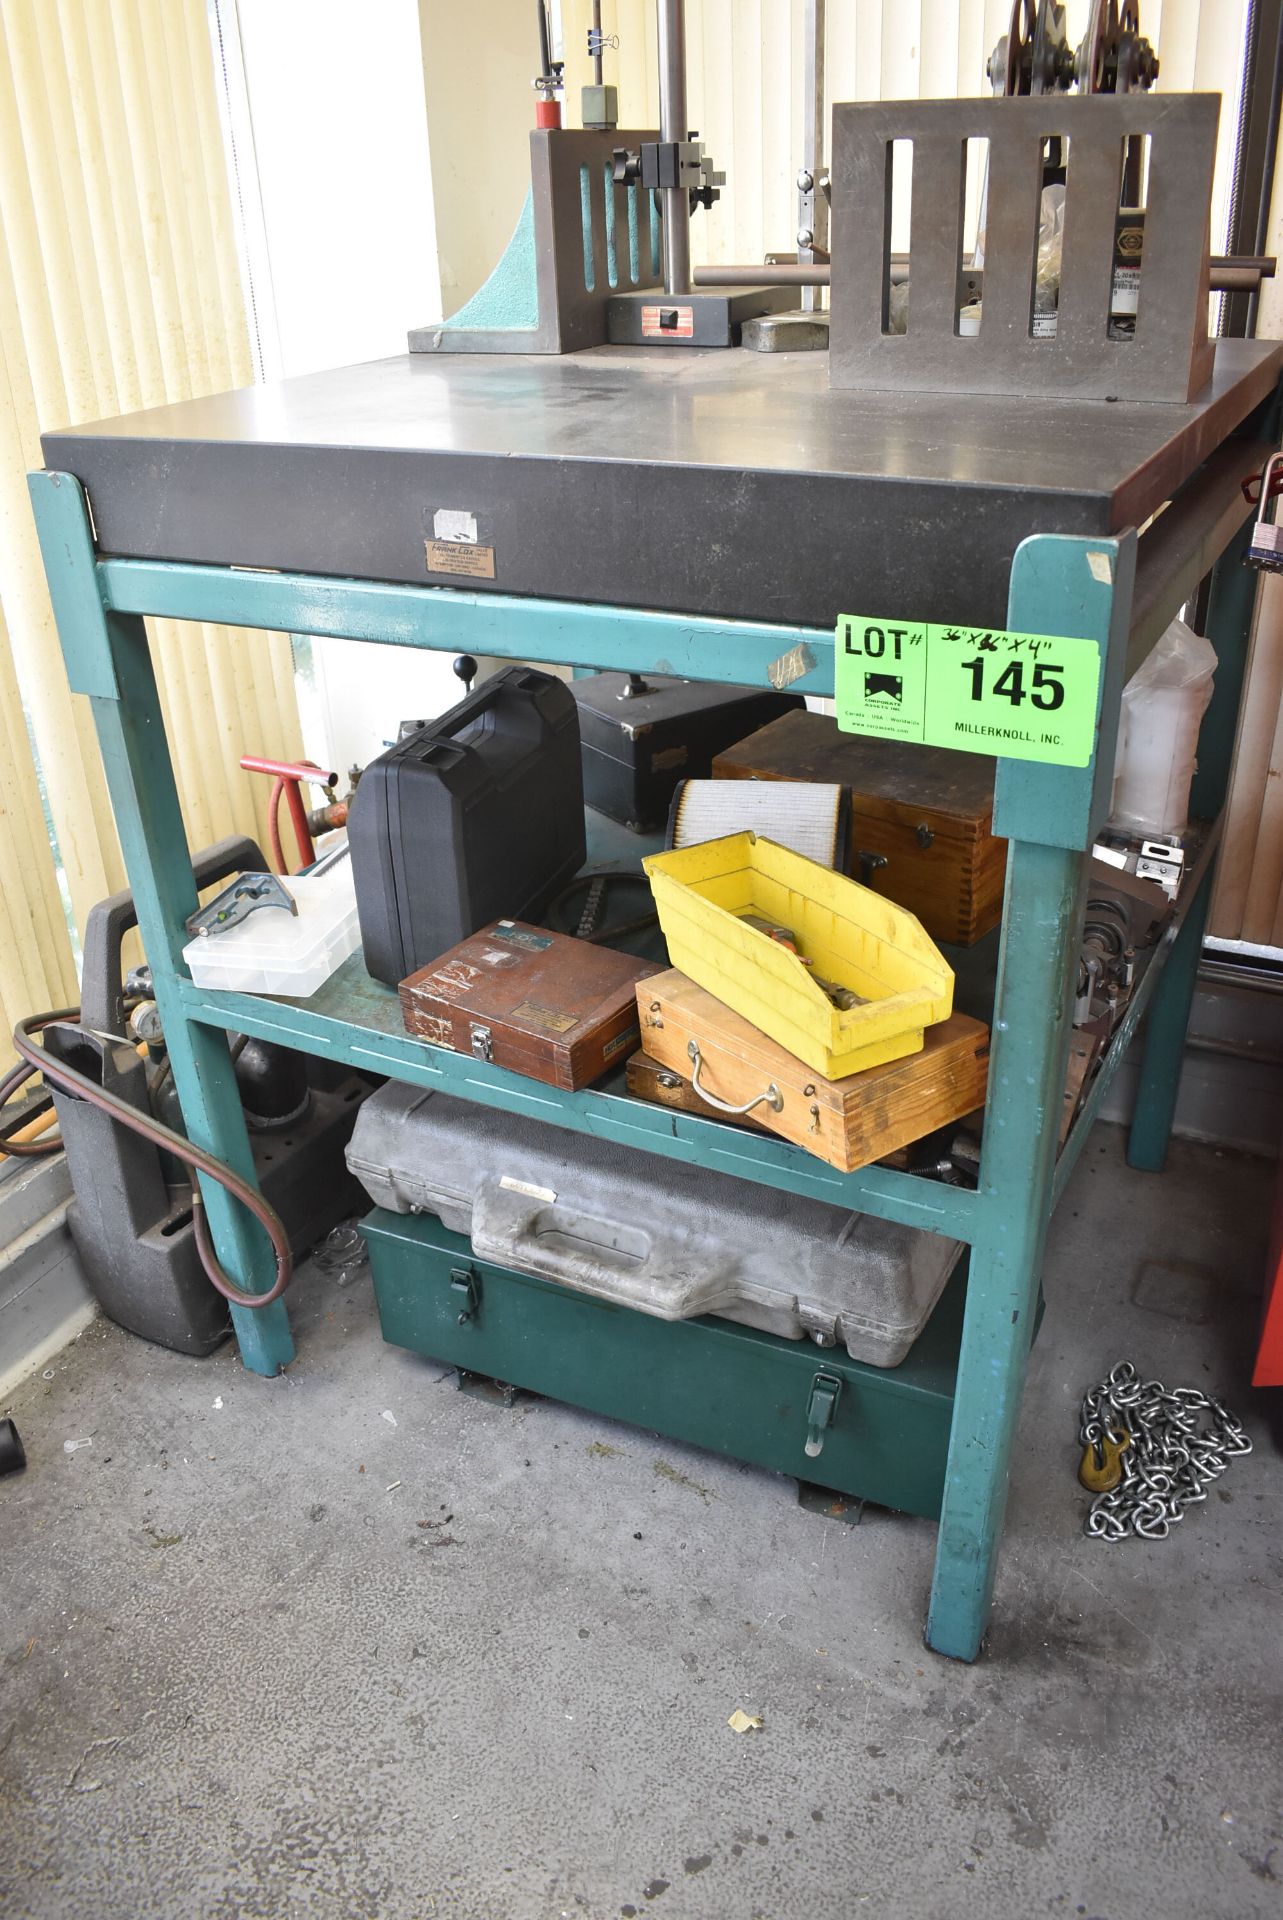 36"X36"X4 GRANITE SURFACE PLATE WITH STAND (CONTENTS NOT INCLUDED) [RIGGING FEE FOR LOT #145 - $25